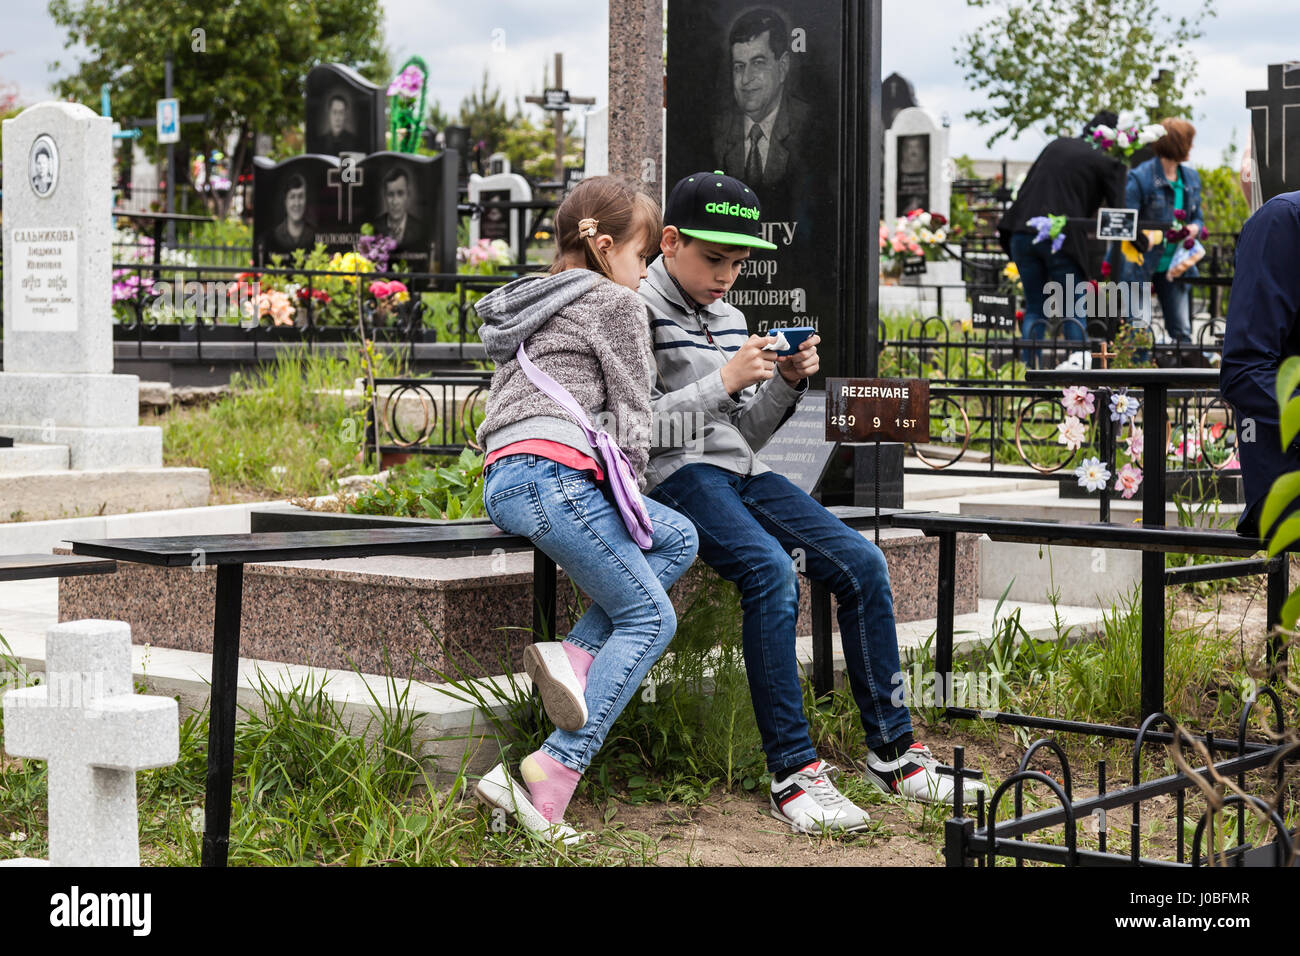 CHISINAU, MOLDOVA: A young boy plays on his mobile while his sister watches  the screen. VISITORS to Europe's largest graveyard have been snapped  breaking bread with the dead. What may seem morbid